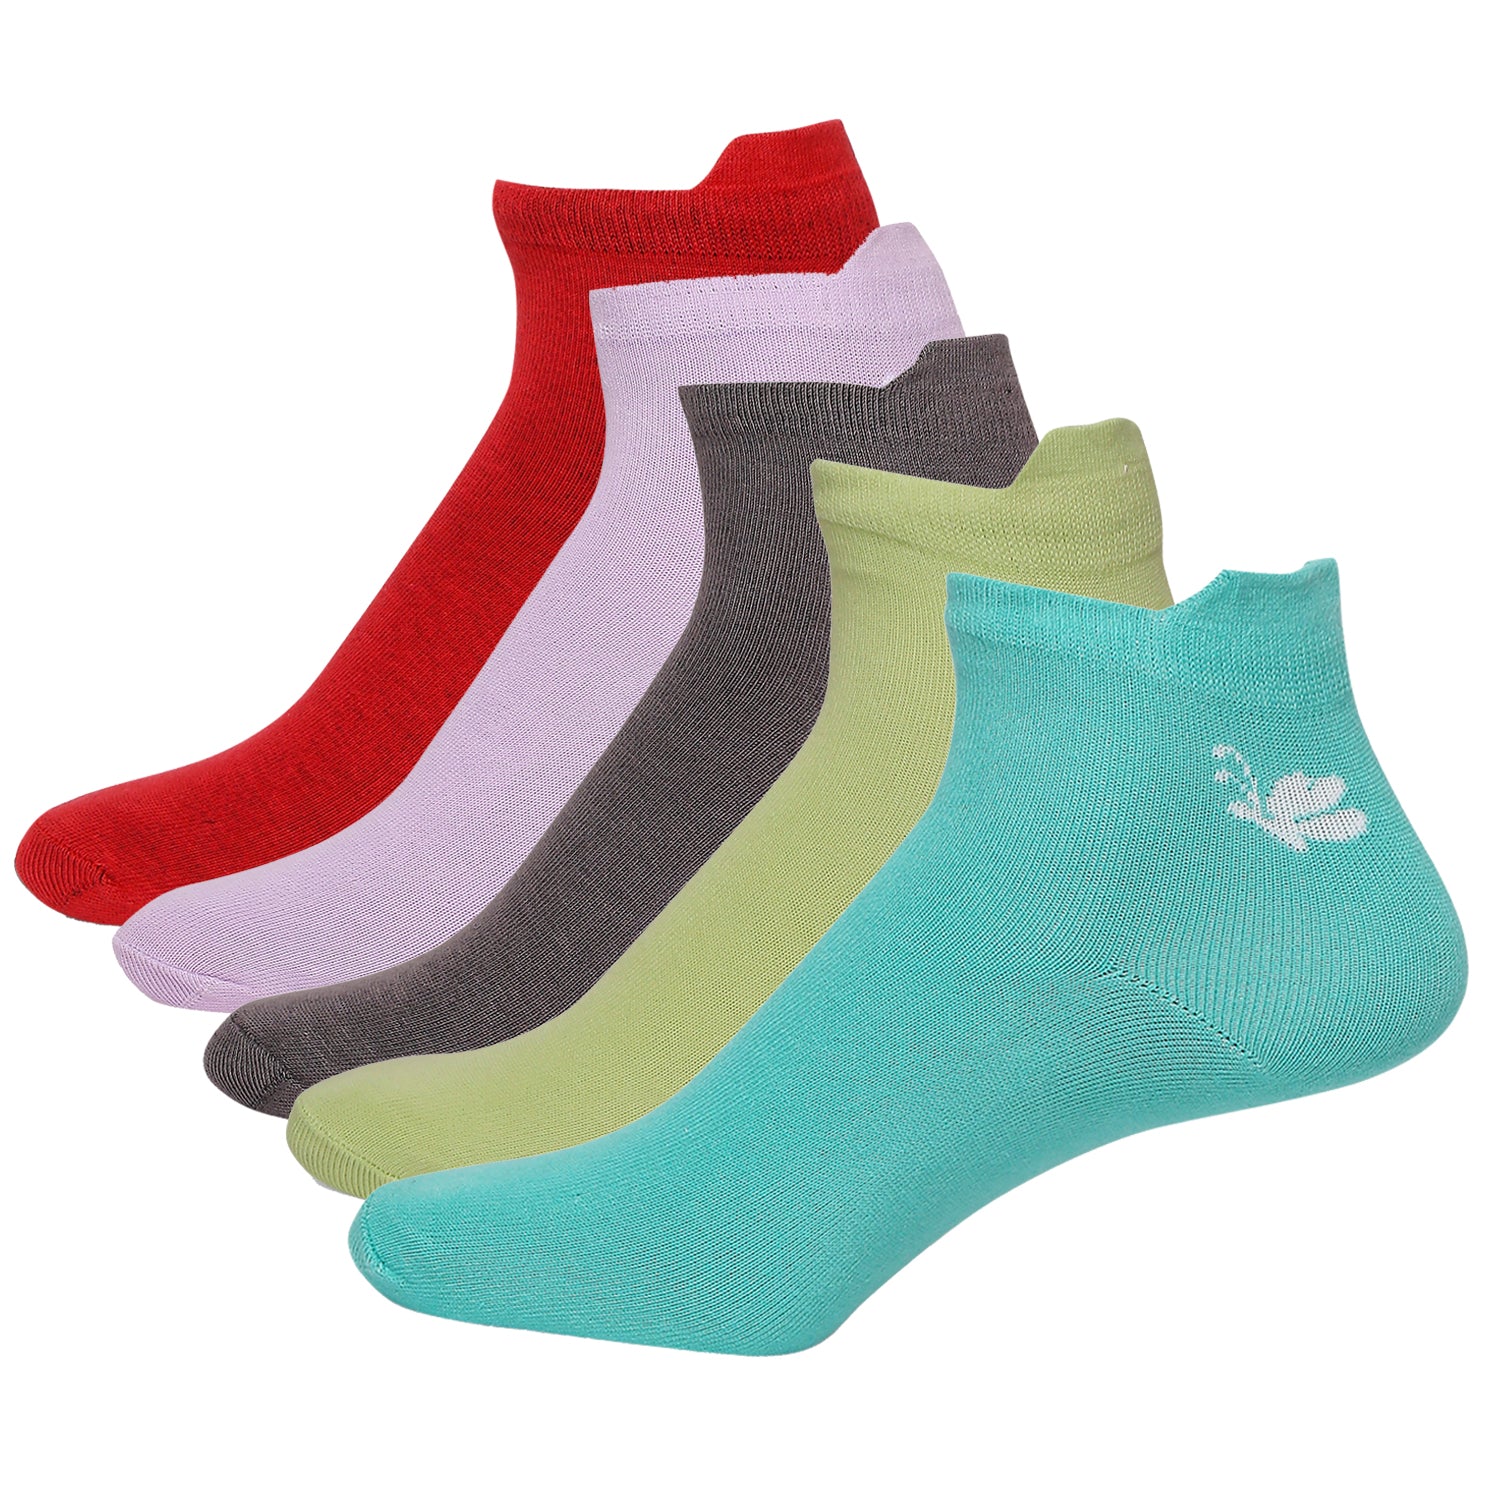 Feelings Sports Socks for Women's 100% Cotton for Active Lifestyles, Moisture Control, and Distinctive Style- Assorted (Pack of 5)